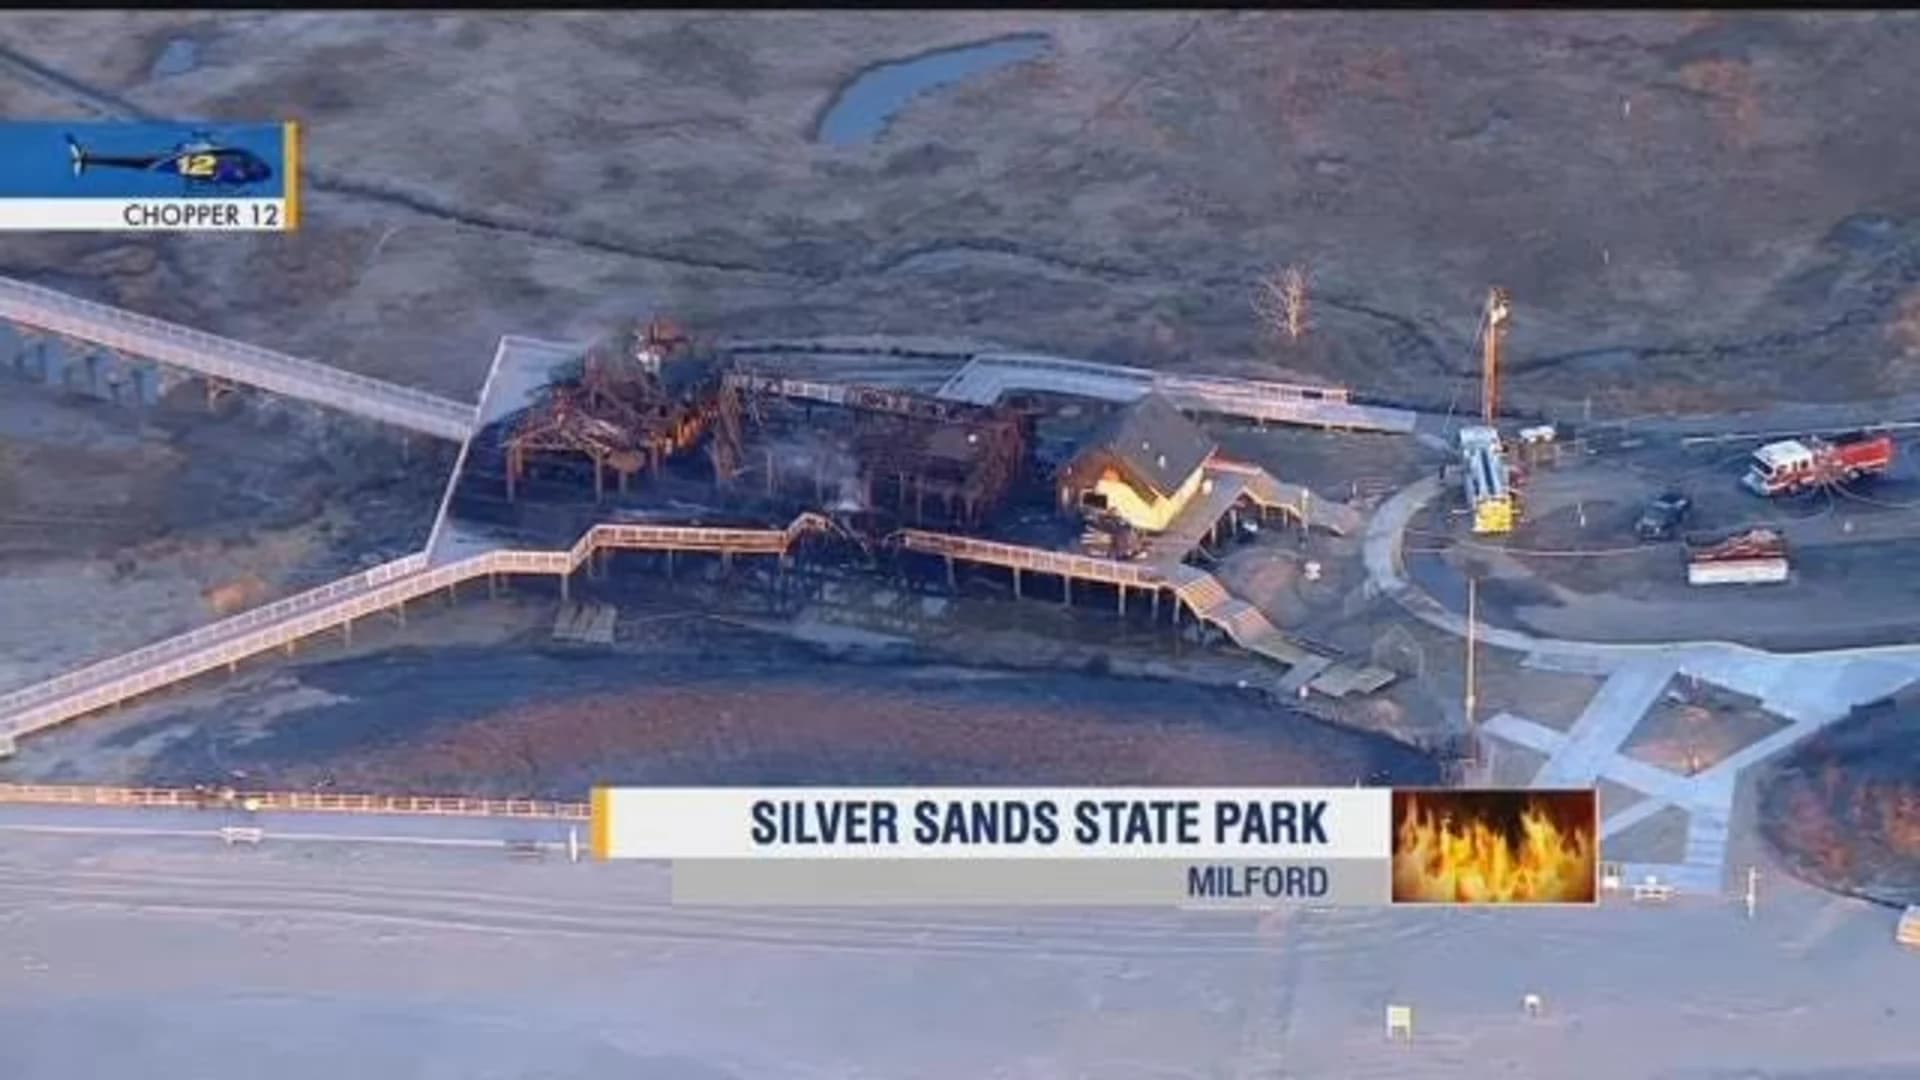 Fire destroys newly constructed $9M building project at Silver Sands State Park